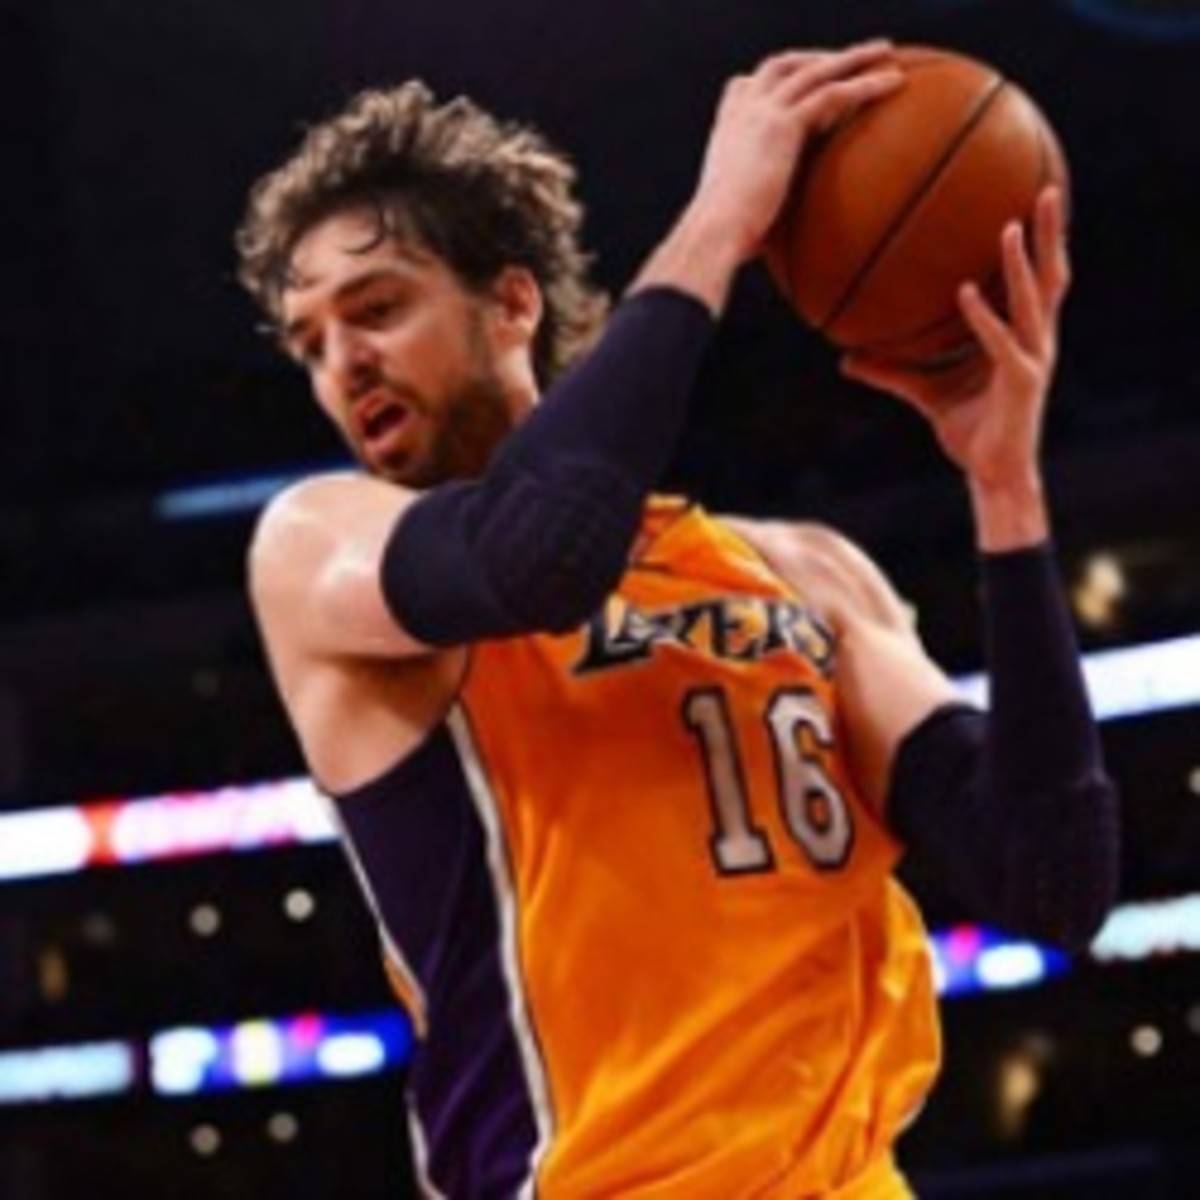 Lakers forward Pau Gasol said he is going to play against the Heat tomorrow night.